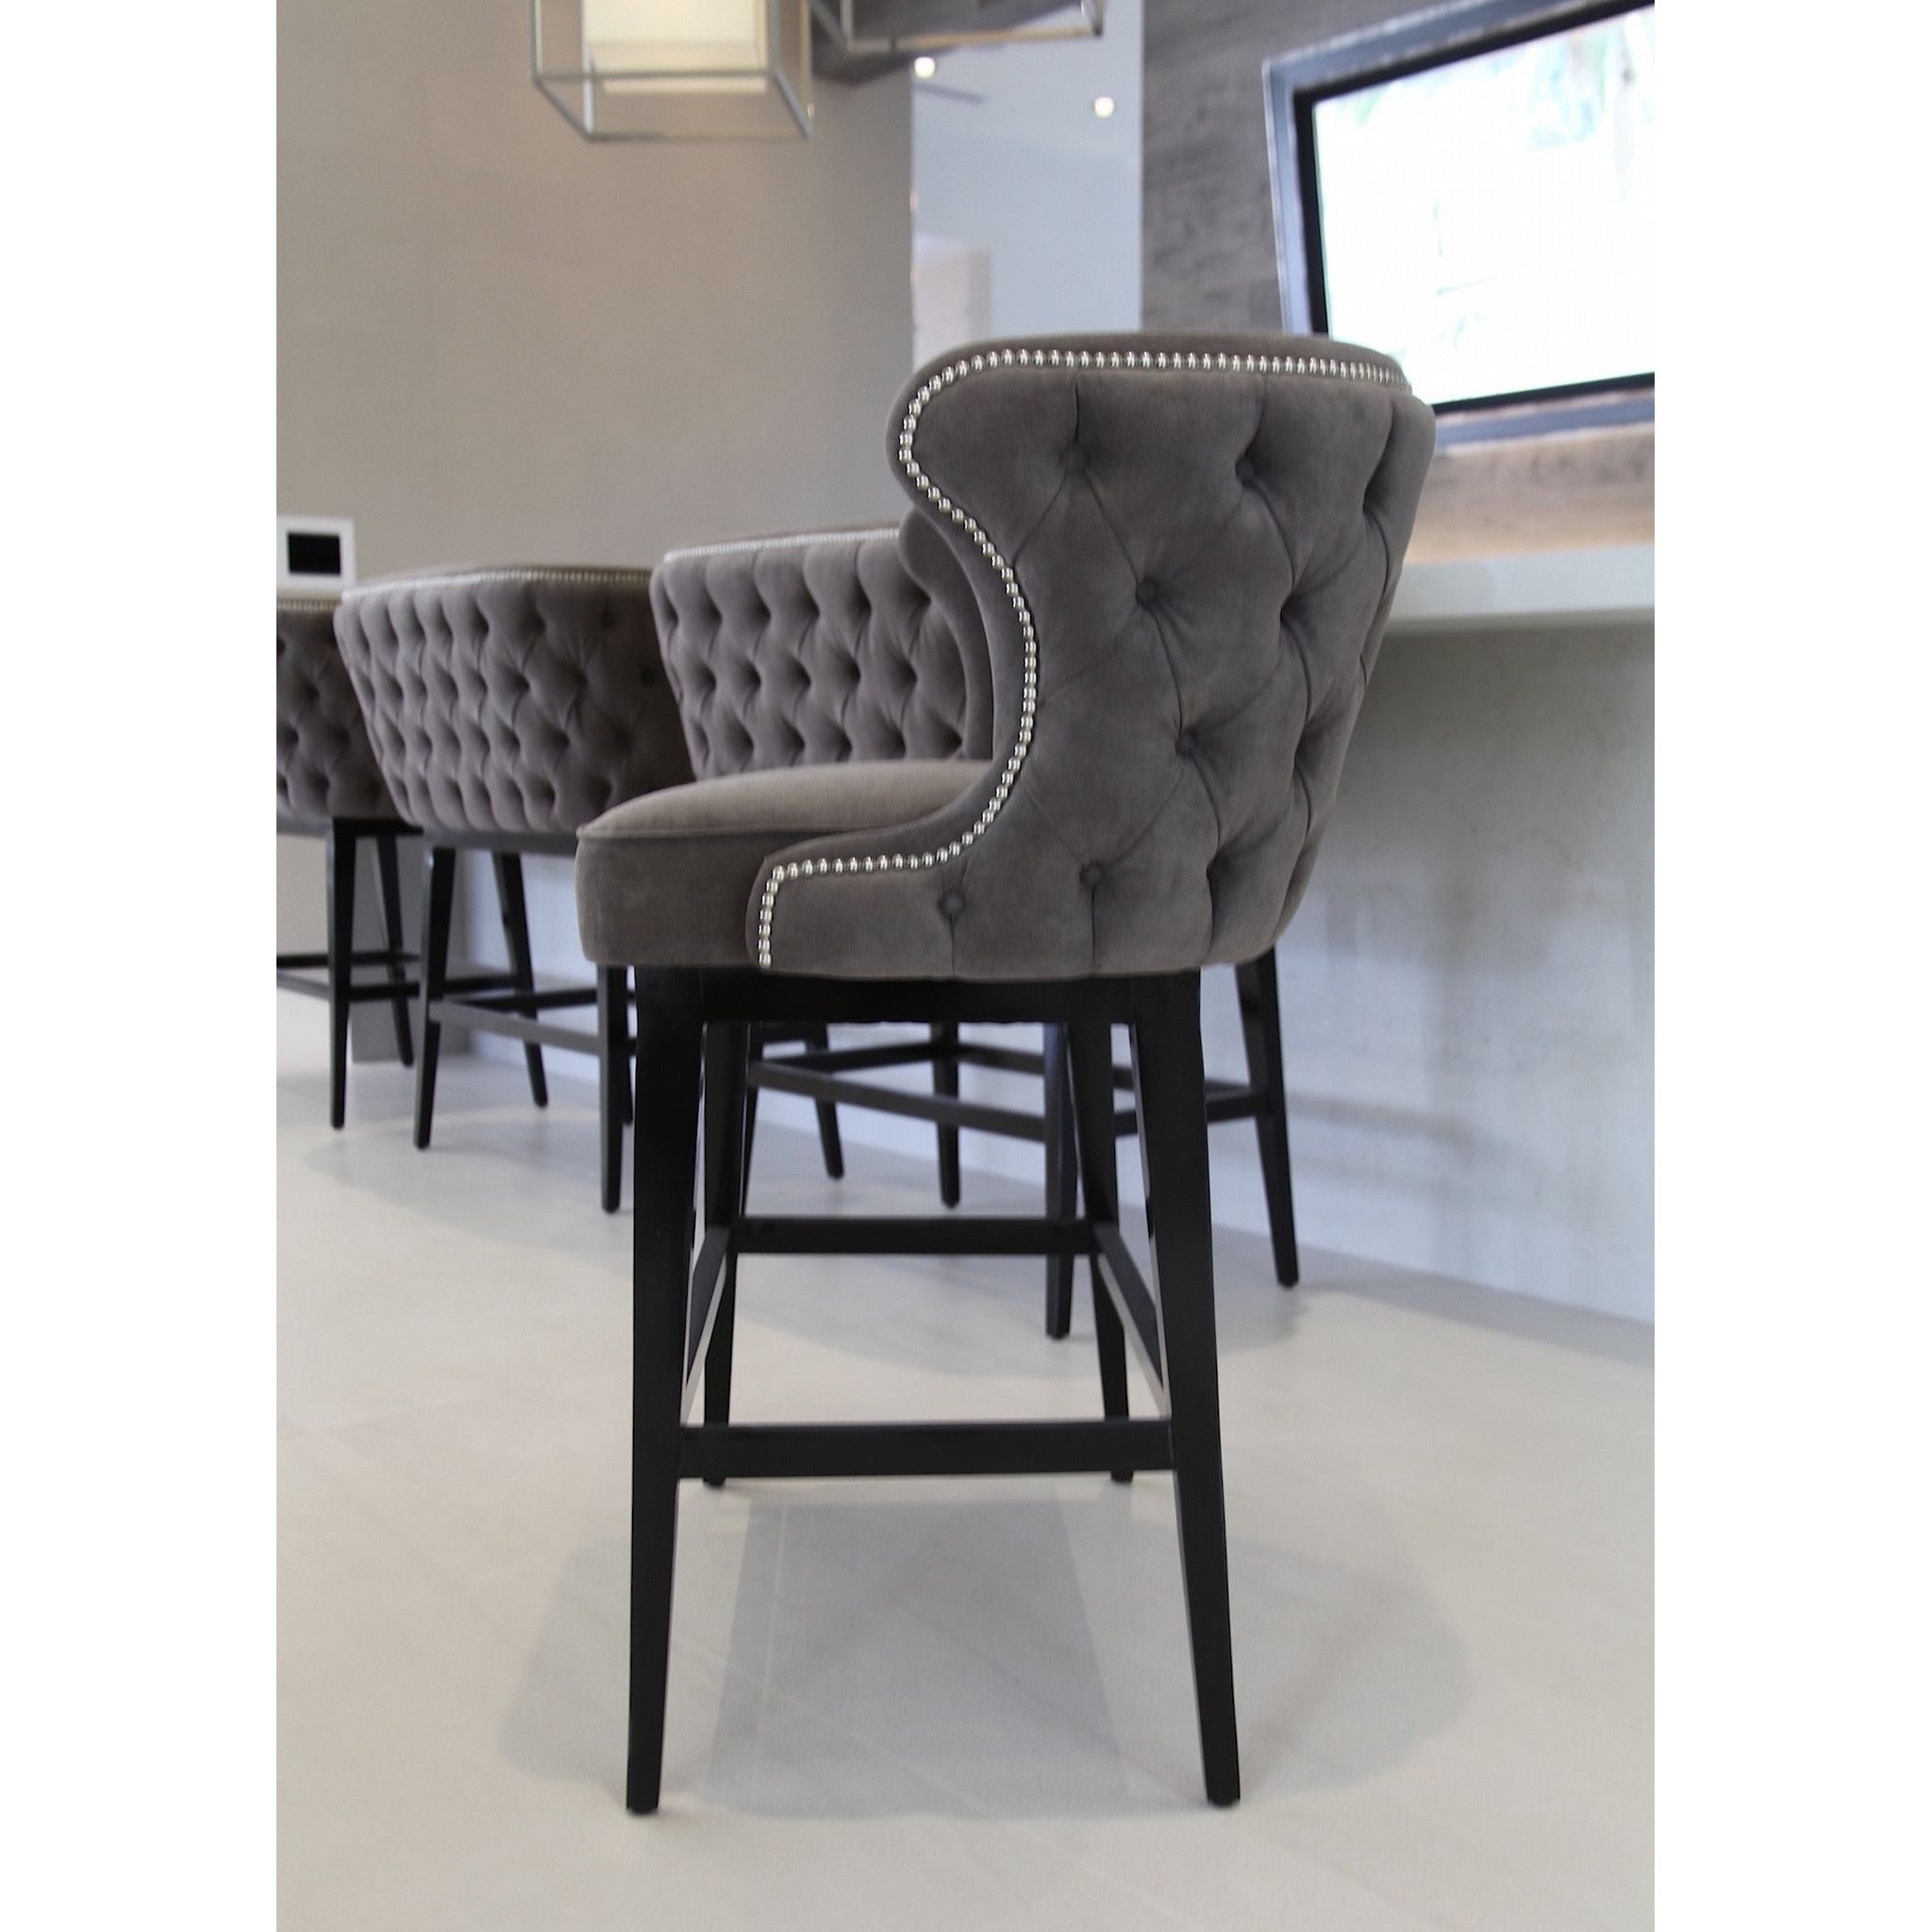 Featured image of post Black Tufted Bar Stools : Most of our signature stools are swivel bar stools with backs.